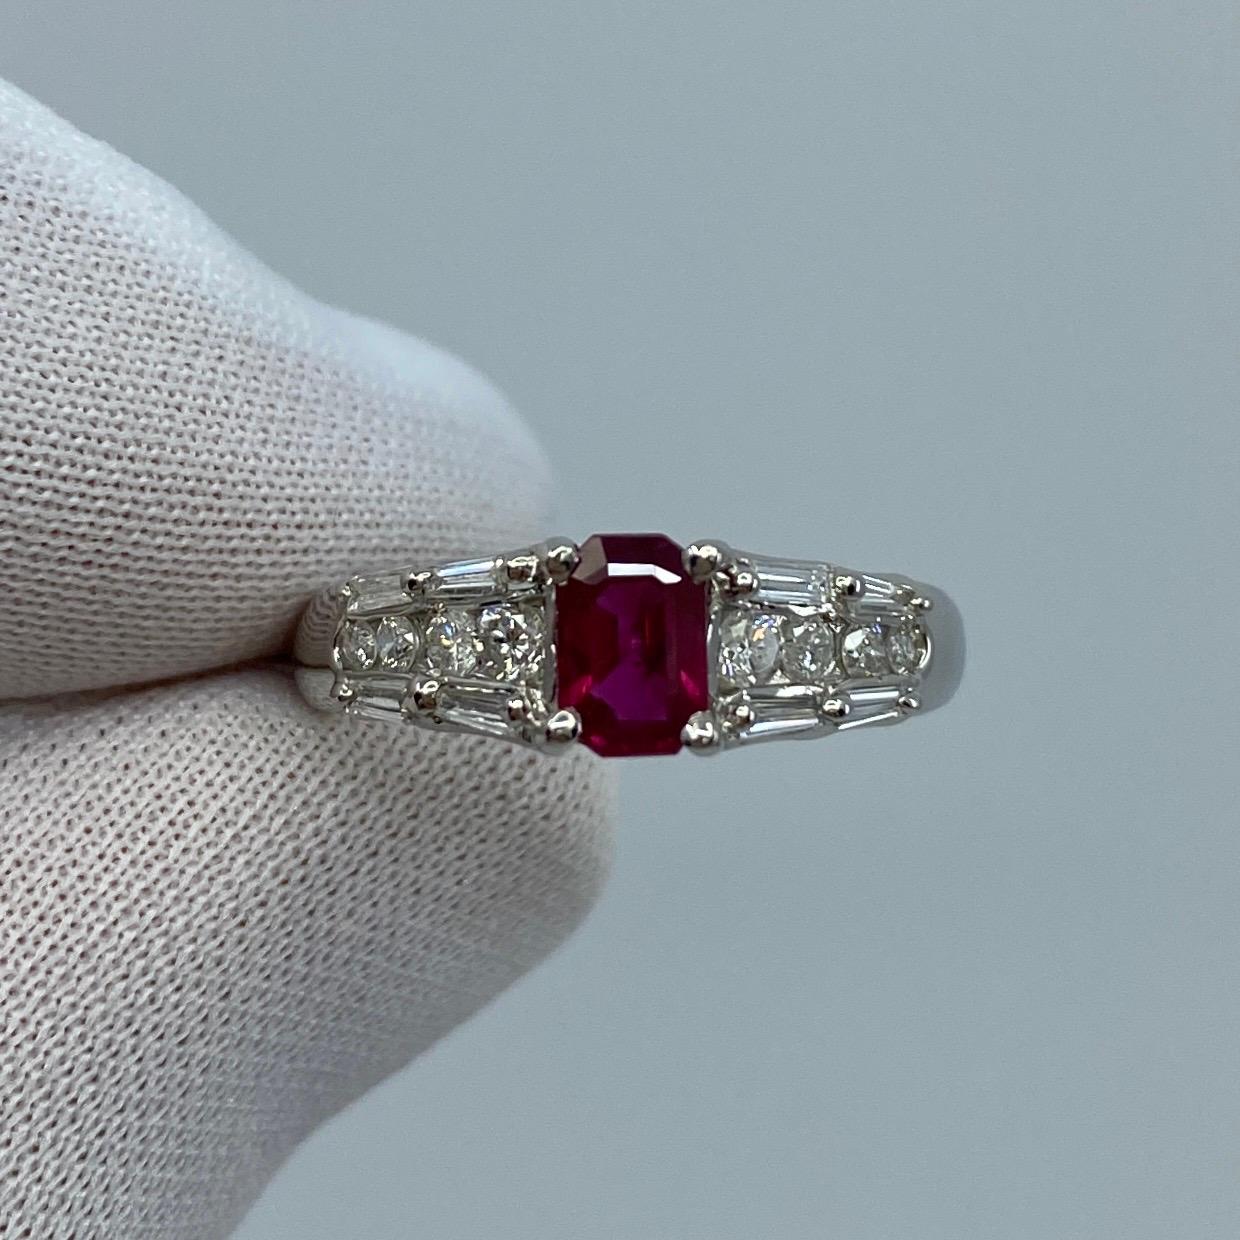 Untreated Emerald Cut Ruby & Diamond Platinum Ring.

1.00 Total carat ring. 0.60ct untreated ruby with a fine deep red colour, an excellent emerald cut and good clarity. Some small natural inclusions visible when looking closely. Accented by 0.40ct